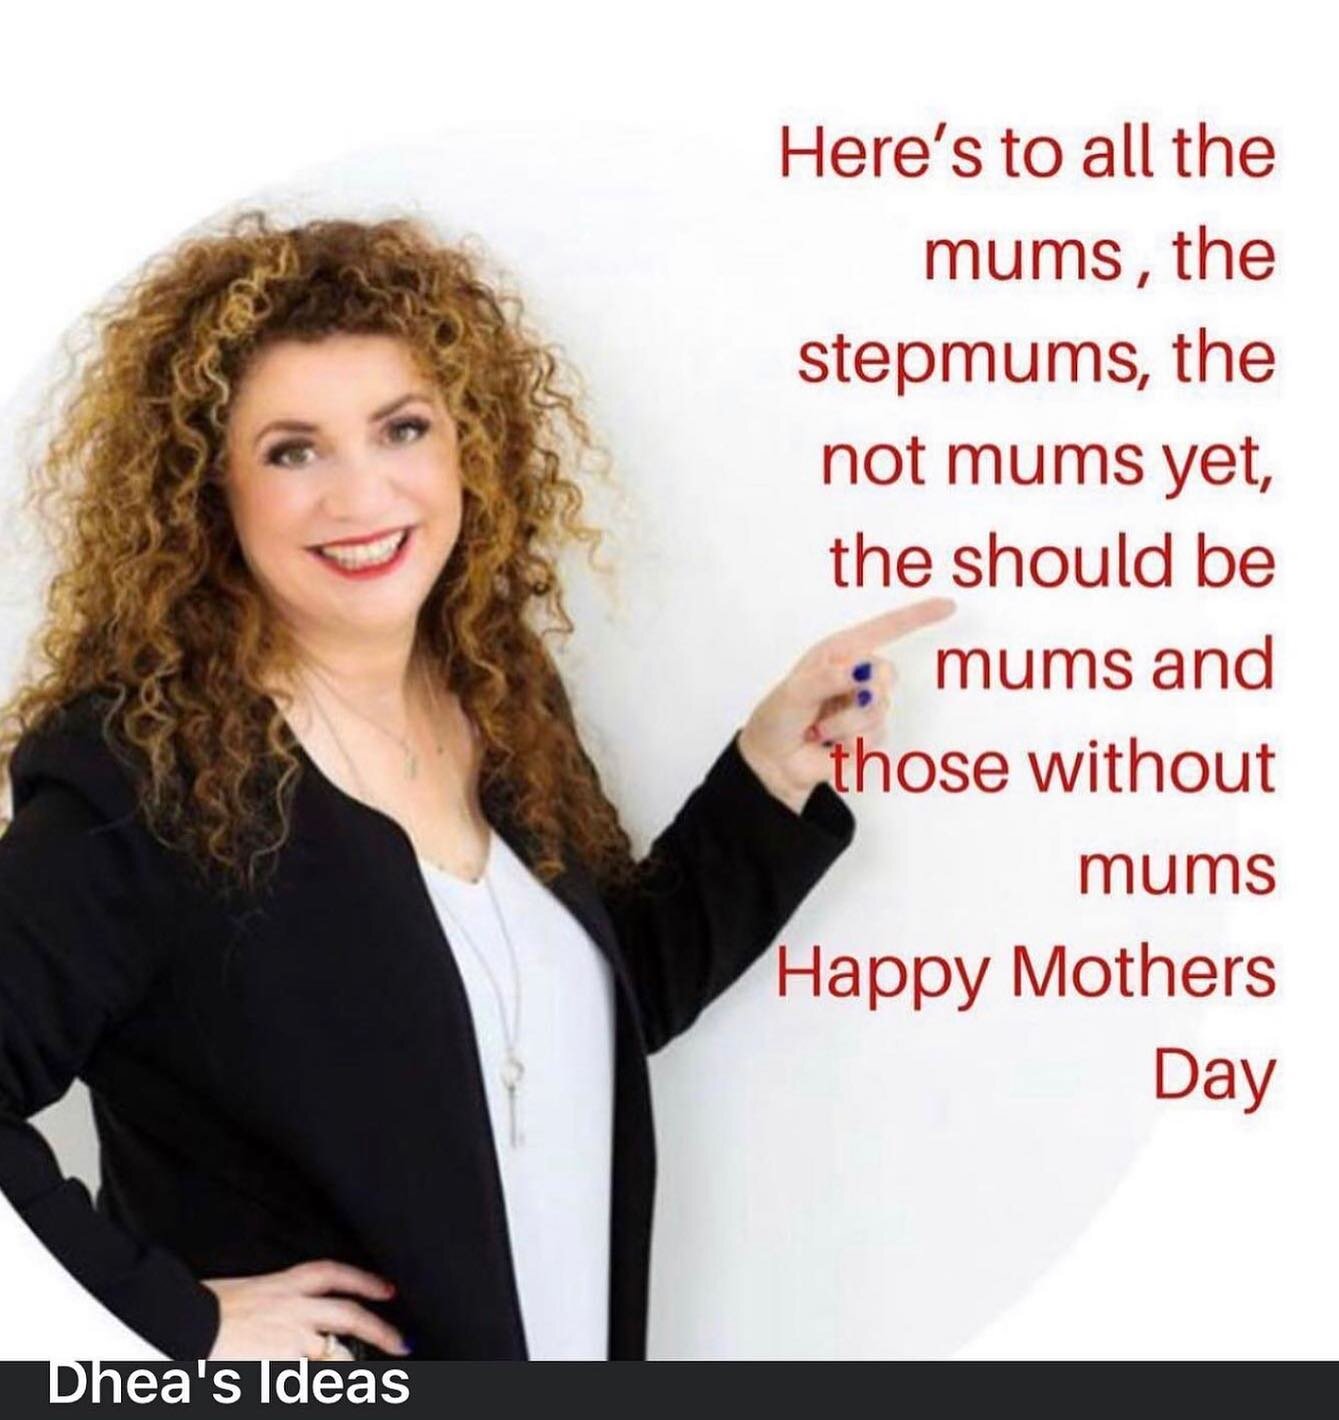 #admin Let&rsquo;s celebrate the special women in our lives ❤️ be they biological, chosen or heartfelt. This is more than just a Hallmark (or SendOutCards) day. Sometimes we need a day for people to be reminded to stop and recognise the specialness o